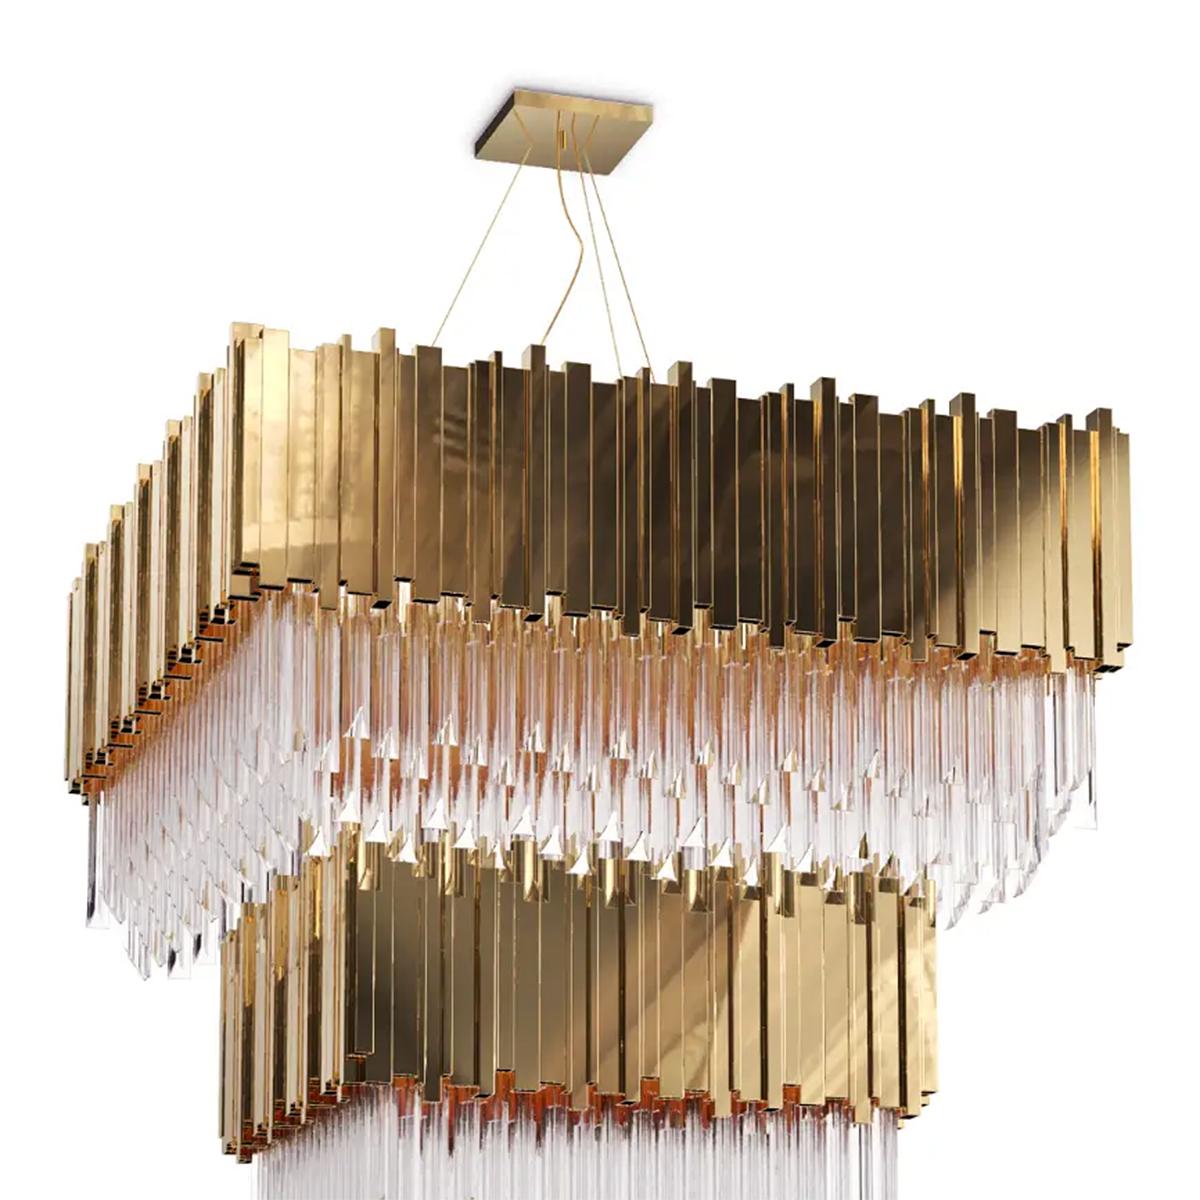 Chandelier Ambassador square with crystal glass pendants.
With four square rows of gold plated polished brass
rectangular sticks. With 75 bulbs, lamp holder type G9.
20 Watt max, for 220-240V. Bulbs not included.
With steel ropes for hanging: